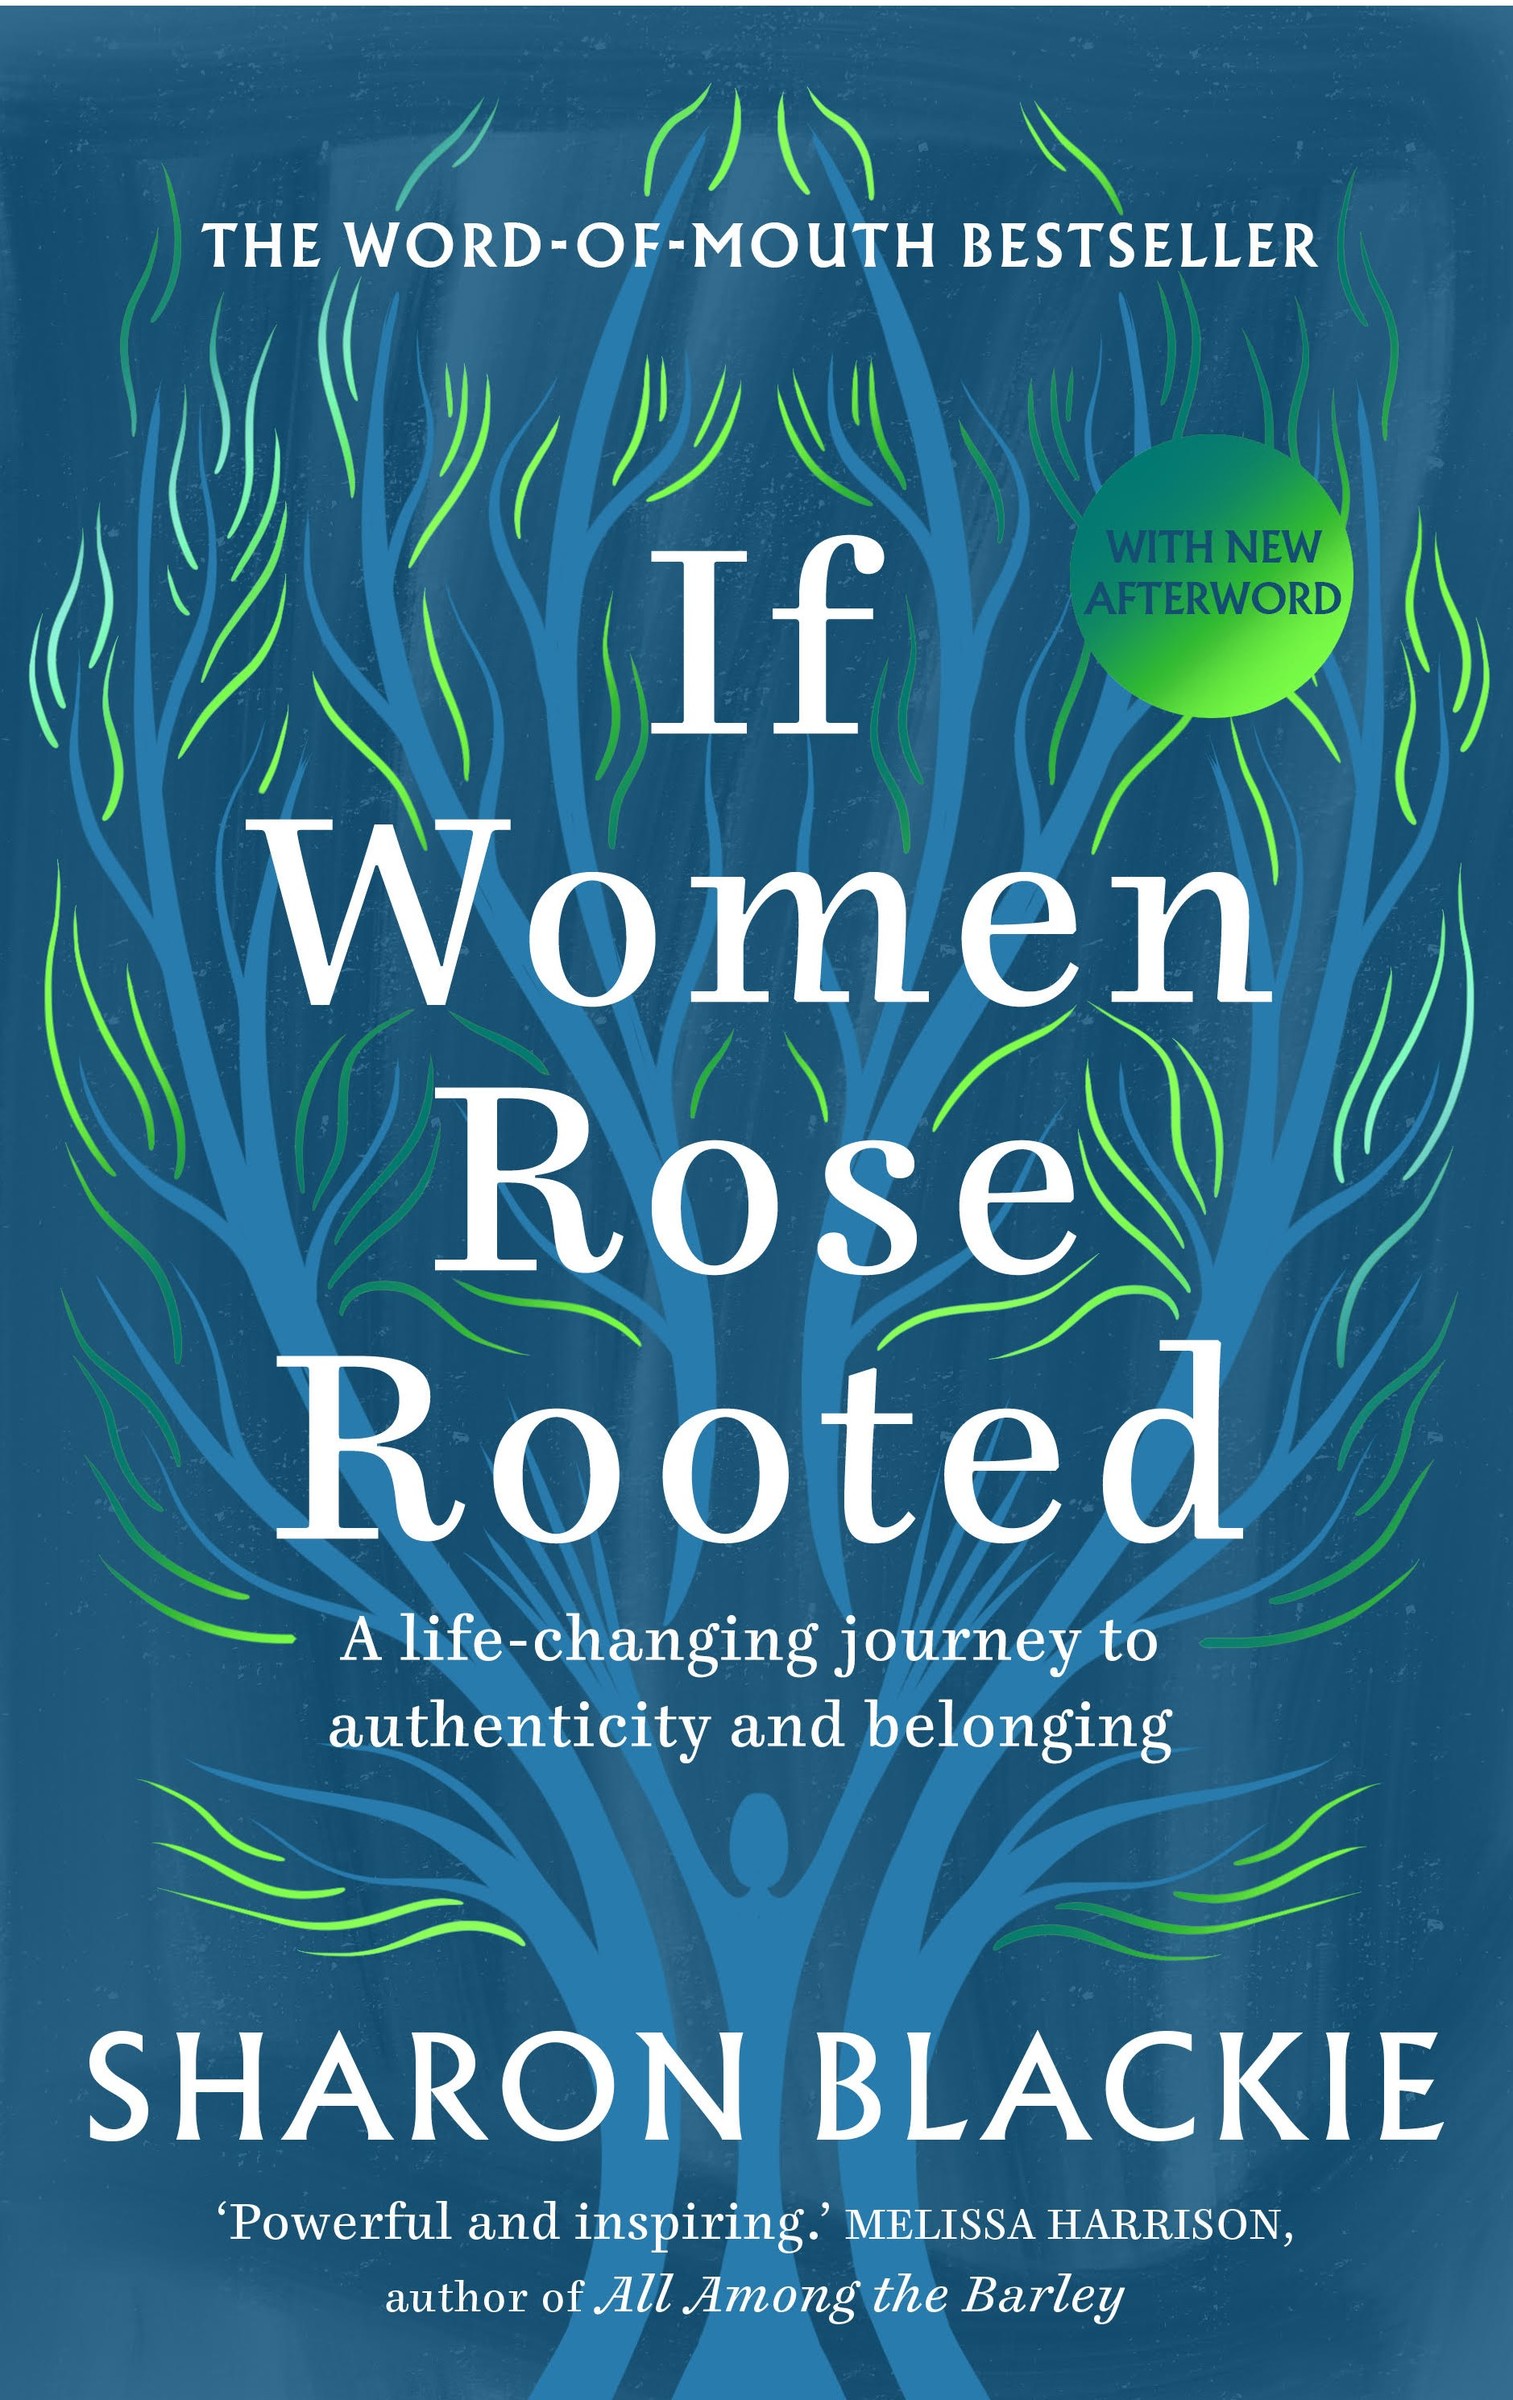 If Women Rose Rooted : A life-changing journey to authenticity and belonging | Blackie, Sharon (Auteur)